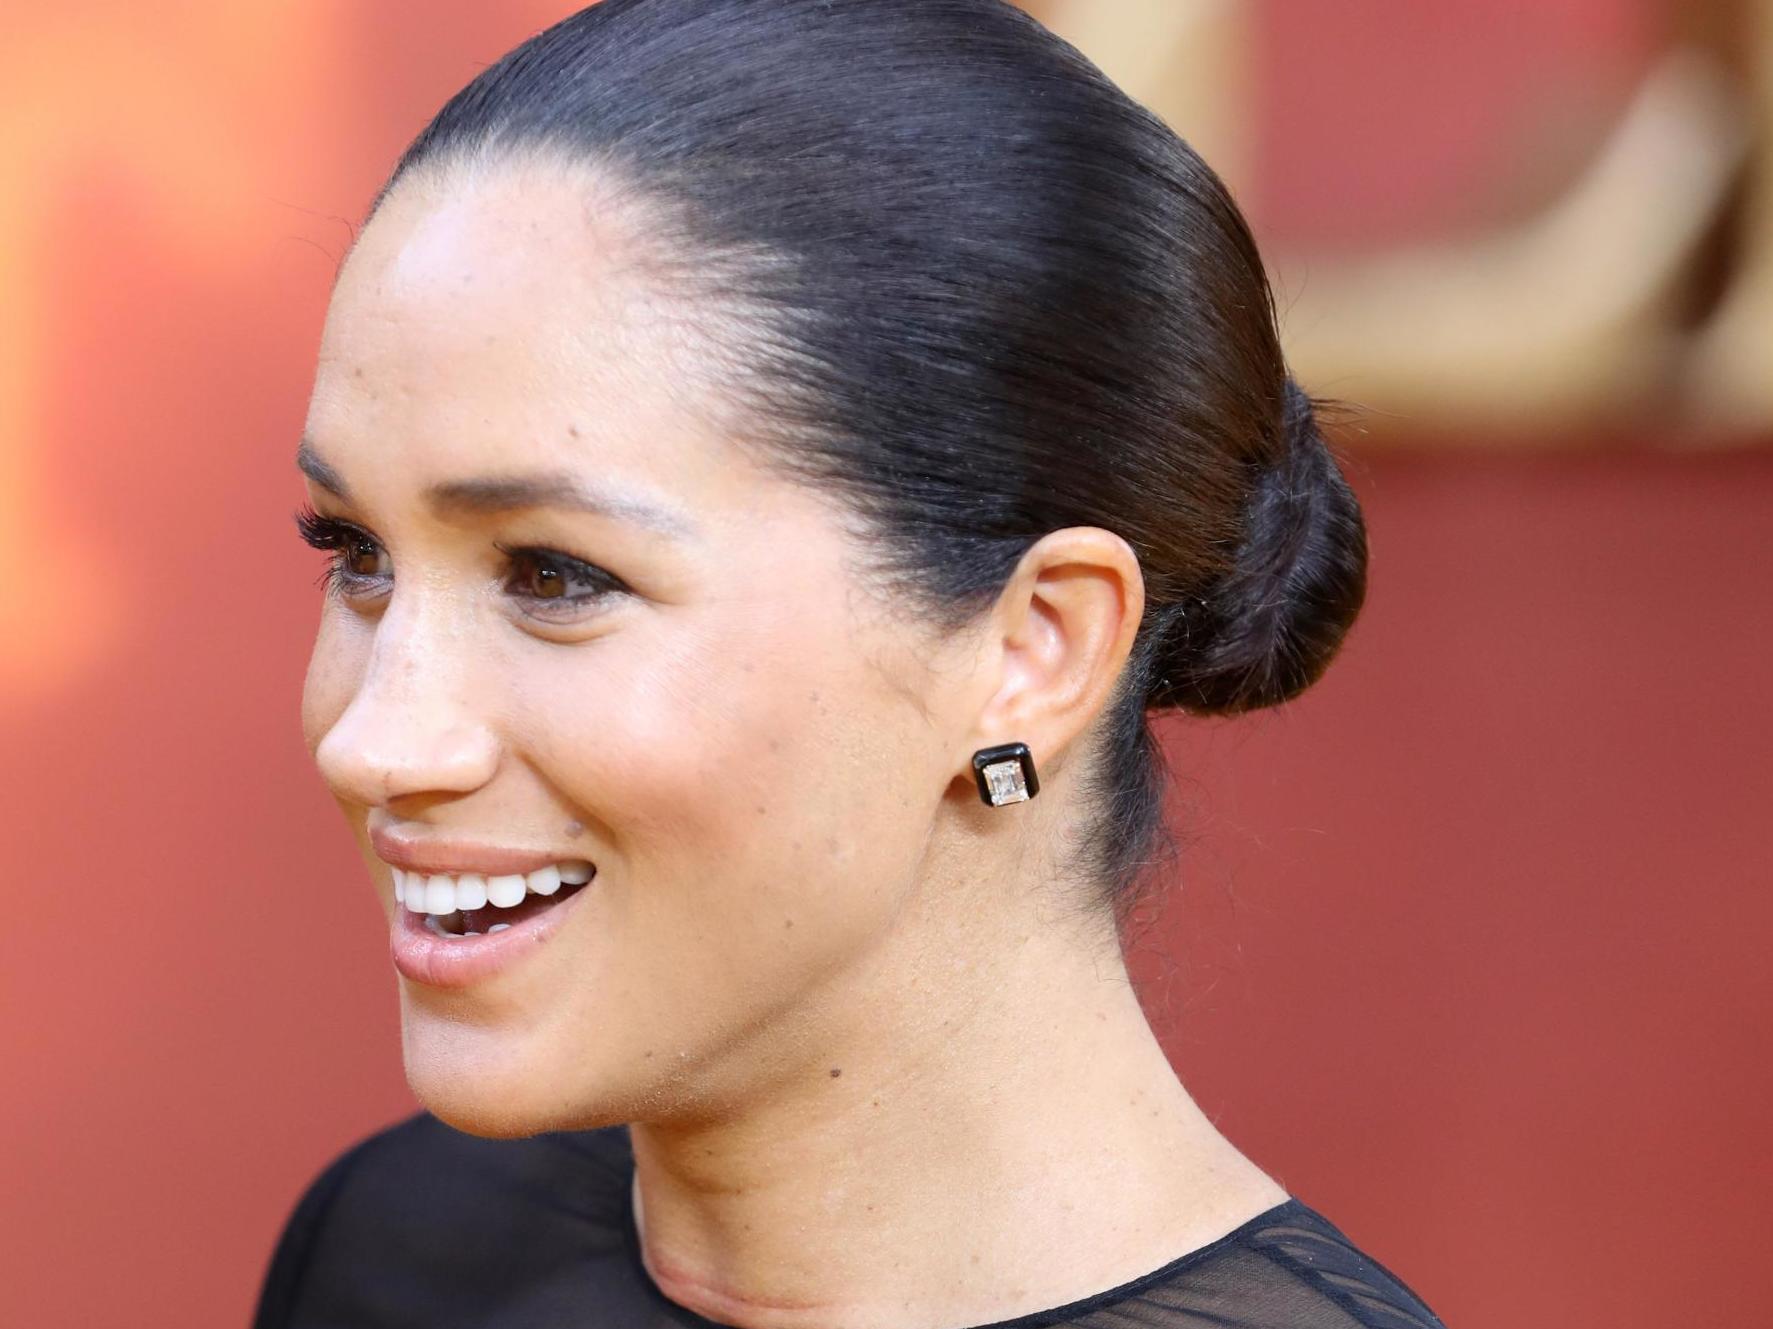 Meghan Markle has expressed opinions rather than just posing for Vogue – cue the familiar abuse